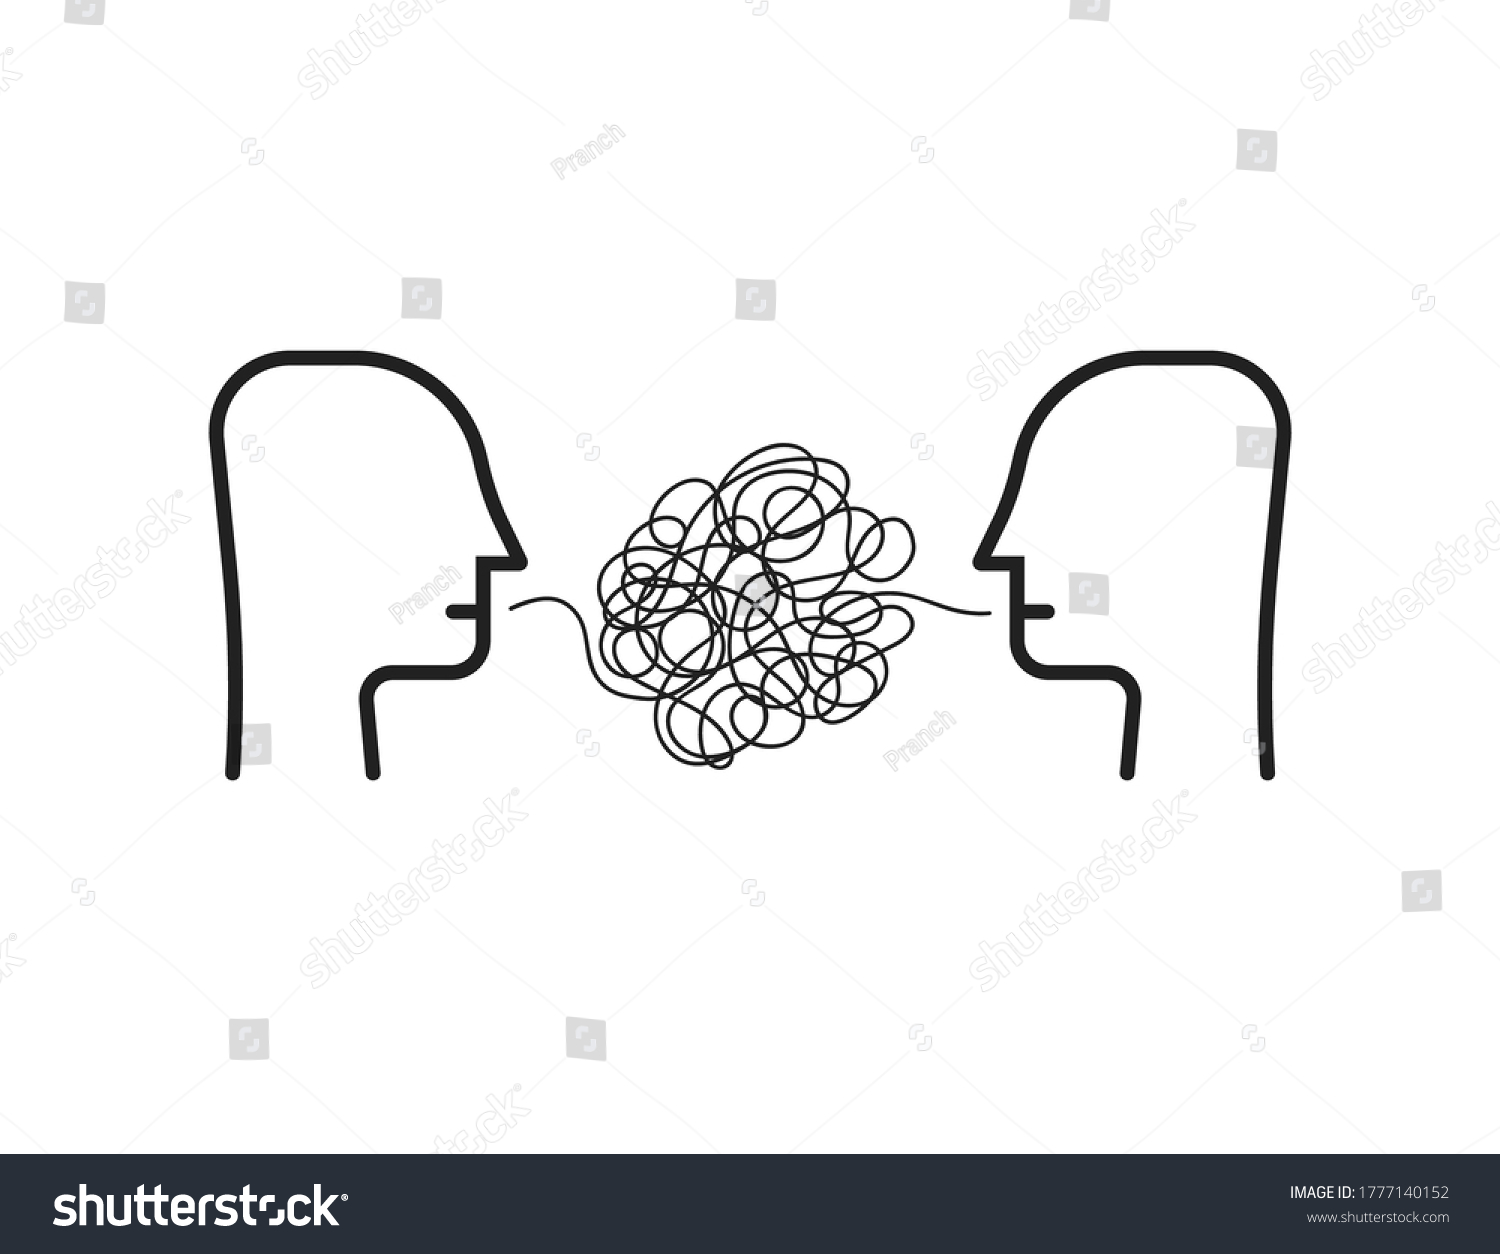 two person with difficult communion. concept of brawl and hard speaking by abuser and depression or stress or anxiety. outline simple trend modern graphic linear design isolated on white background #1777140152